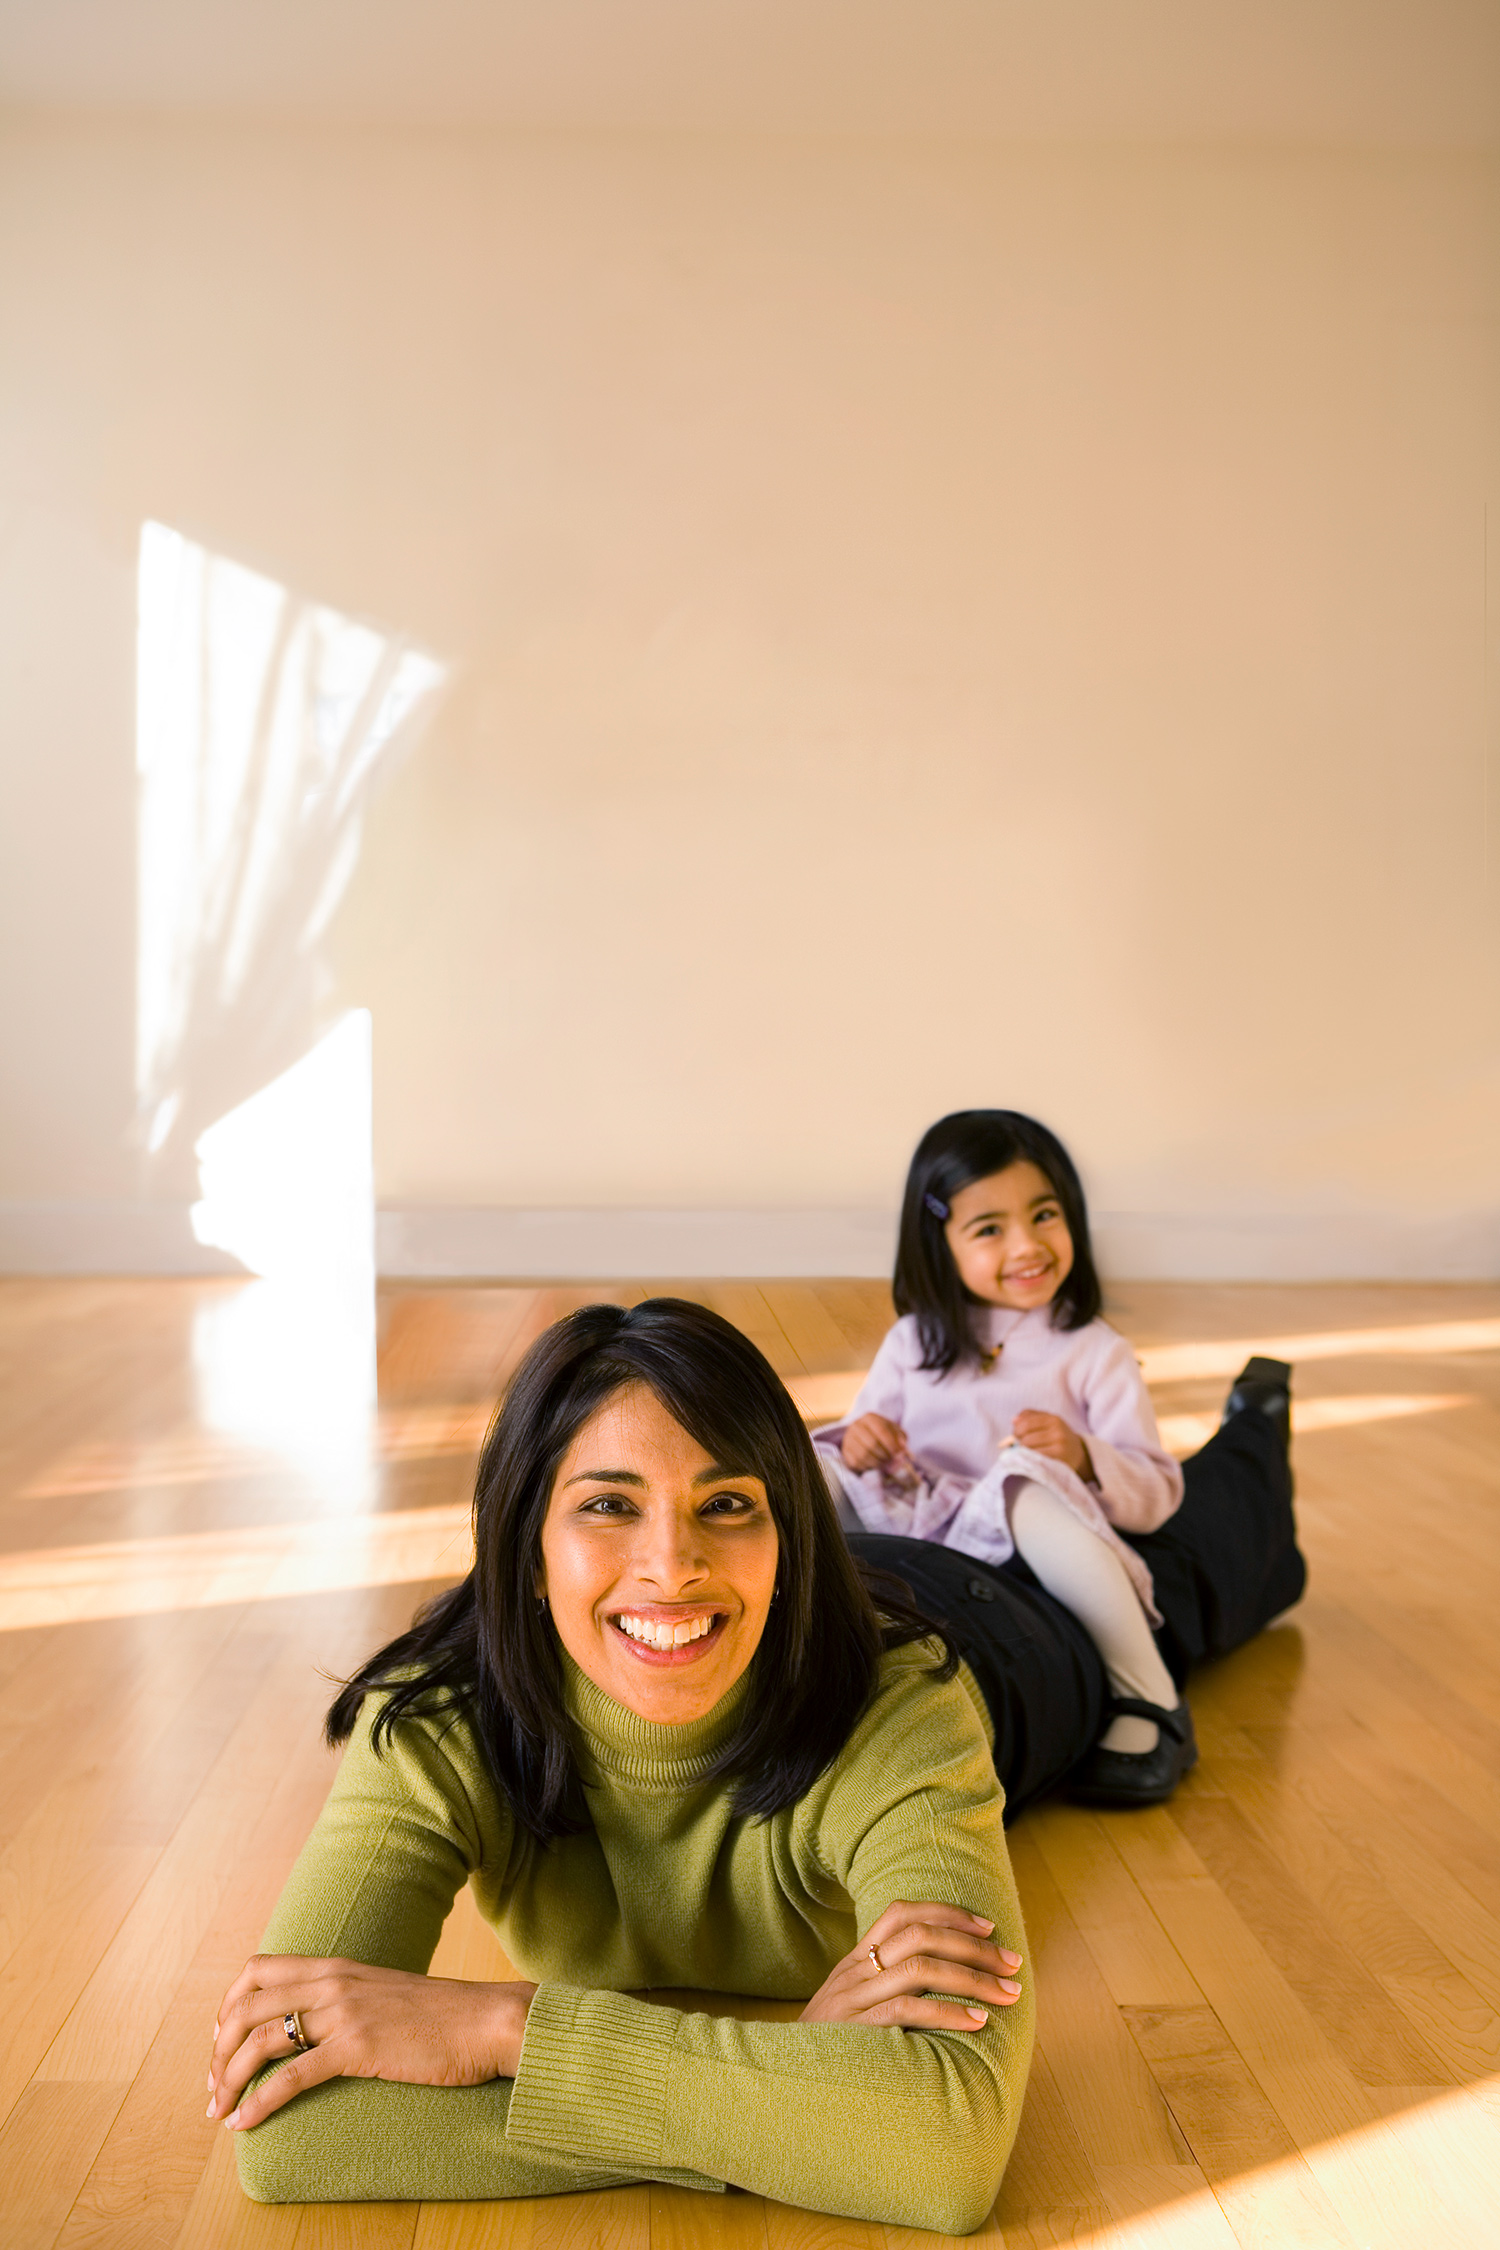 Sangeeta Bhatia lies on a wooden floor and is propped up on her elbows. Her daughter sits on her legs.